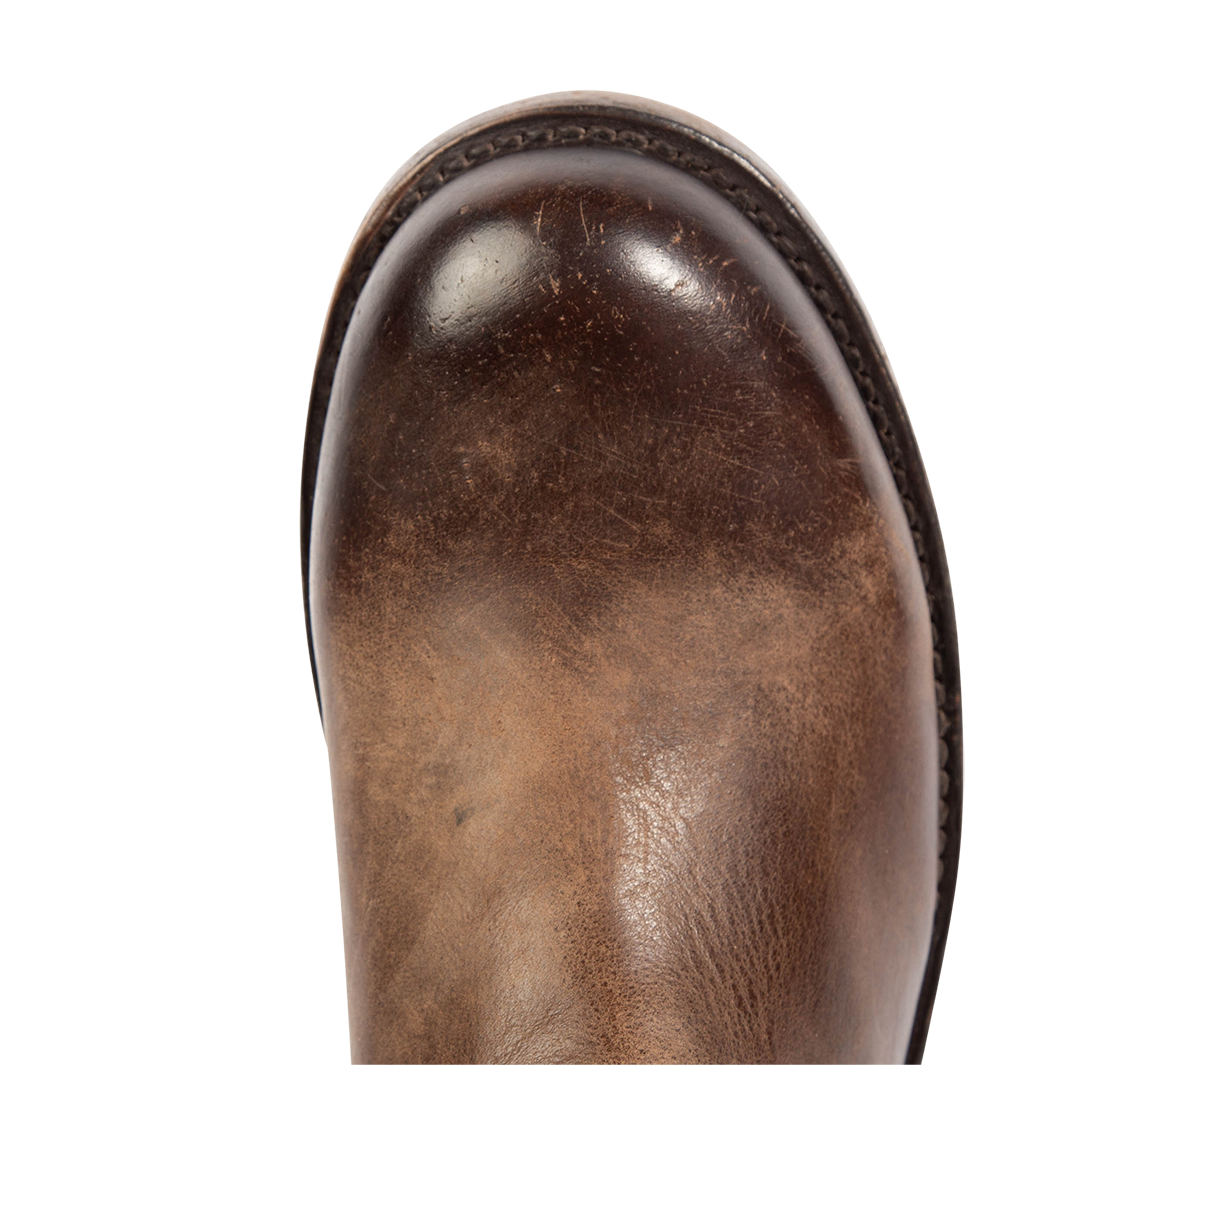 Top view showing round toe on FREEBIRD men's Charles brown leather boot